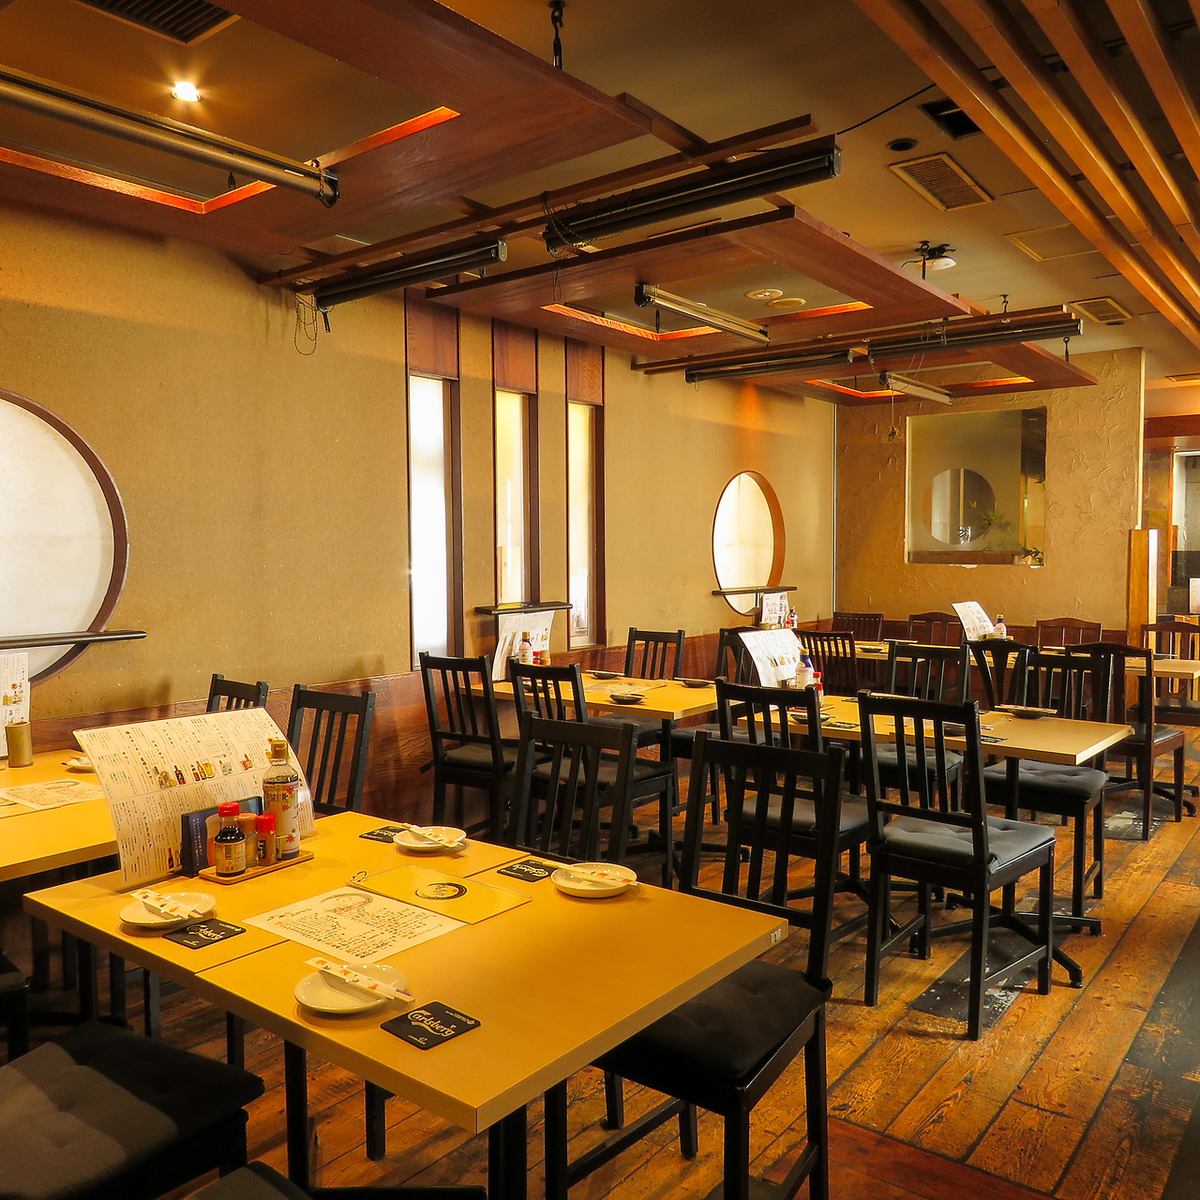 The spacious interior is perfect for private reservations! Please feel free to contact us★